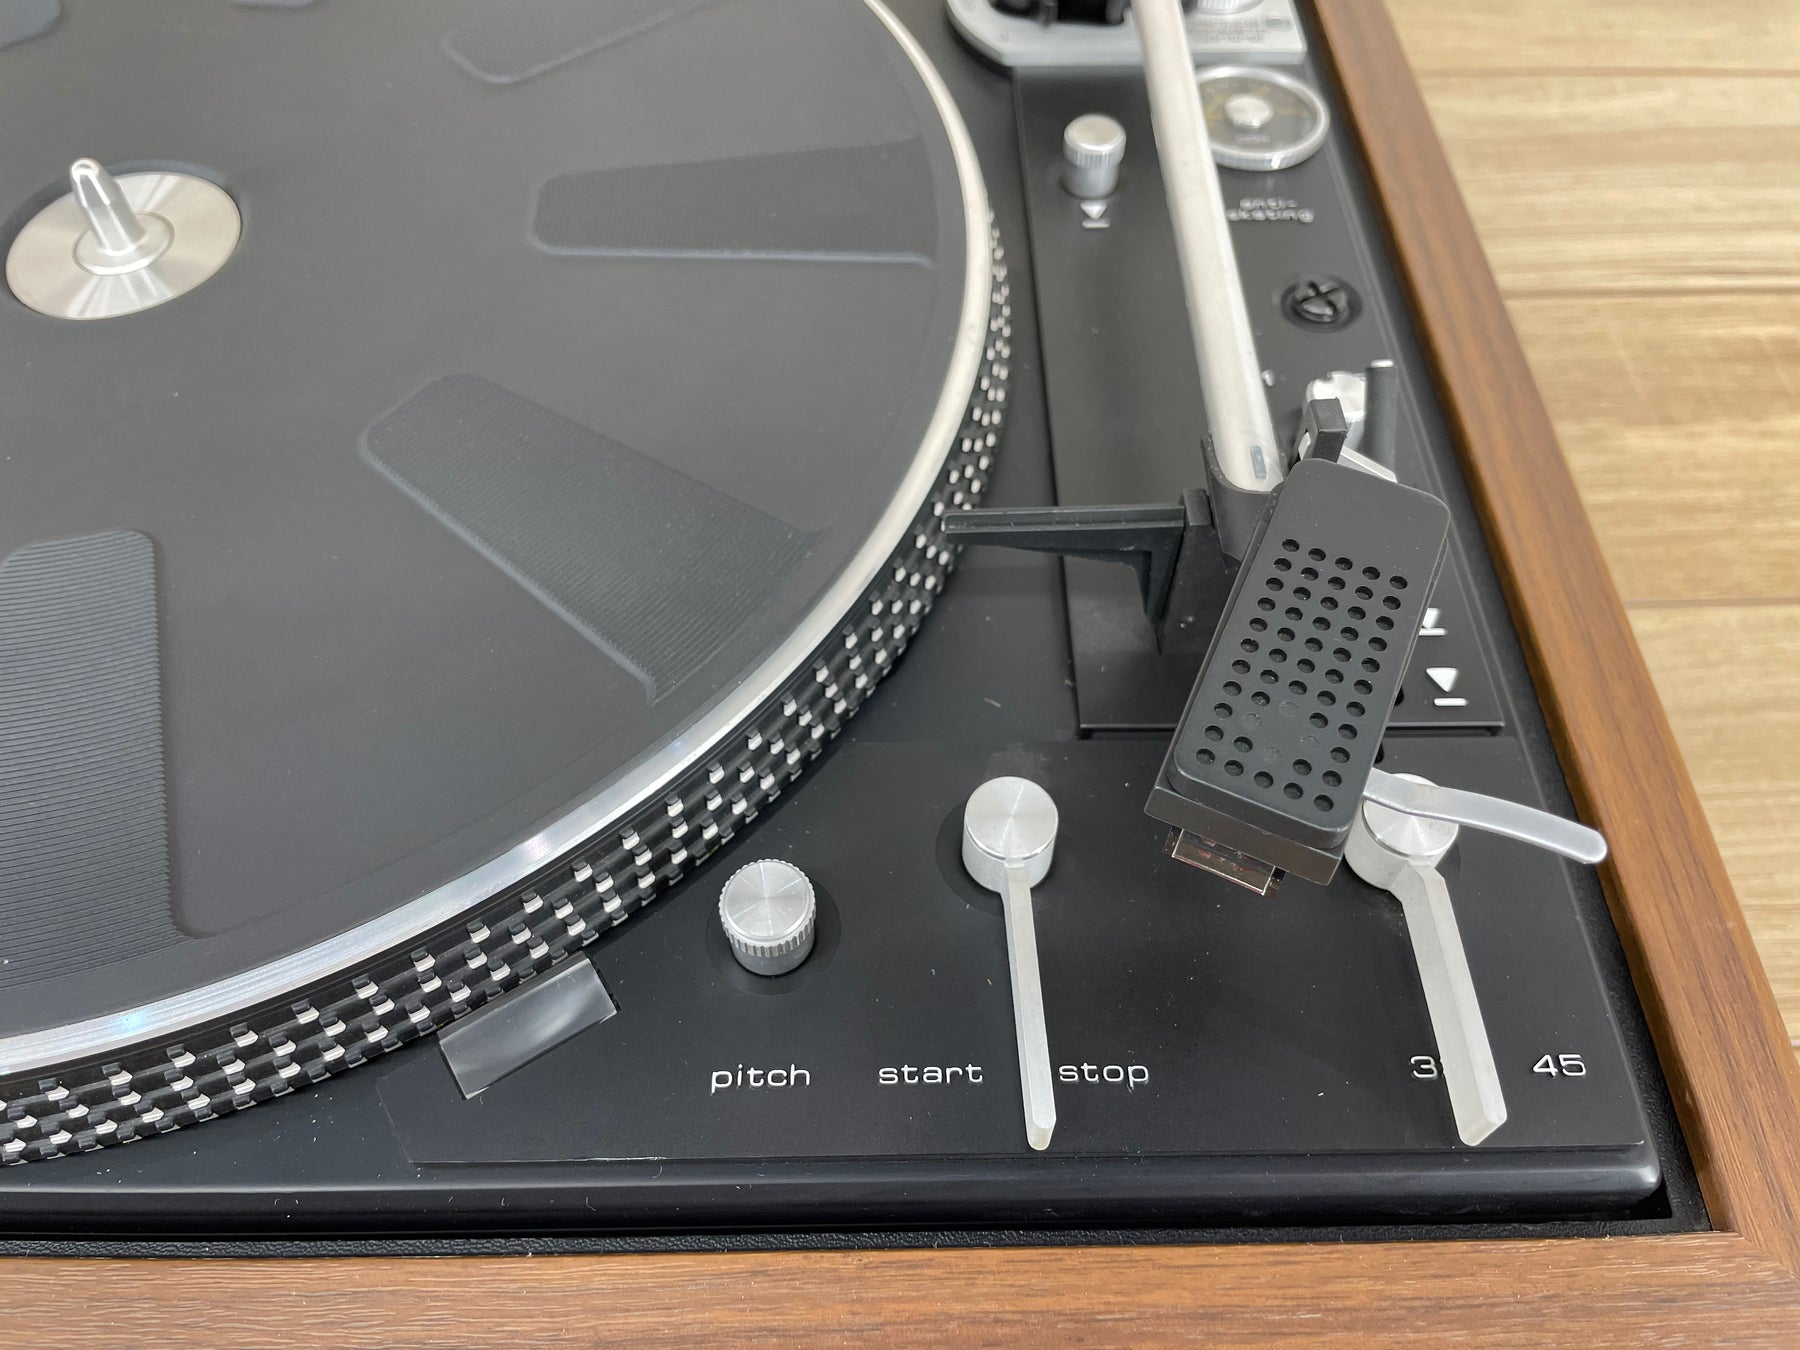 Dual 721 Turntable with fresh Denon DL110 Cartridge.